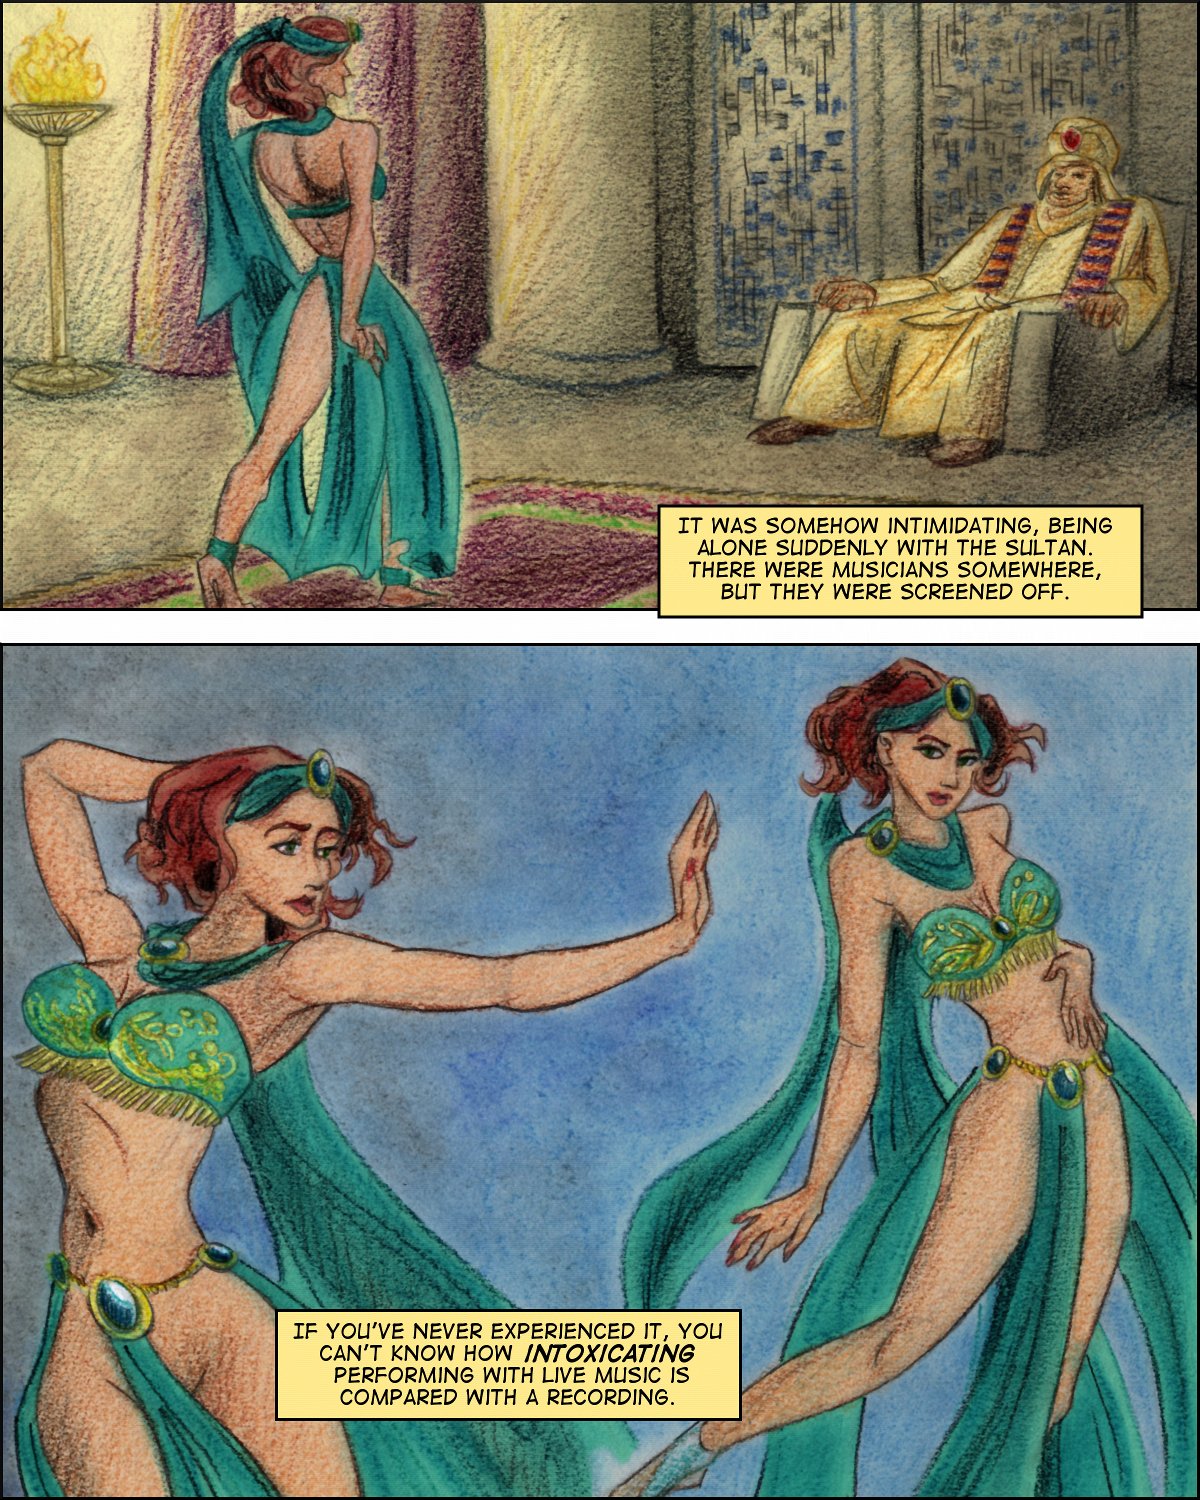 Bridget begins an erotic belly dance for the sultan.